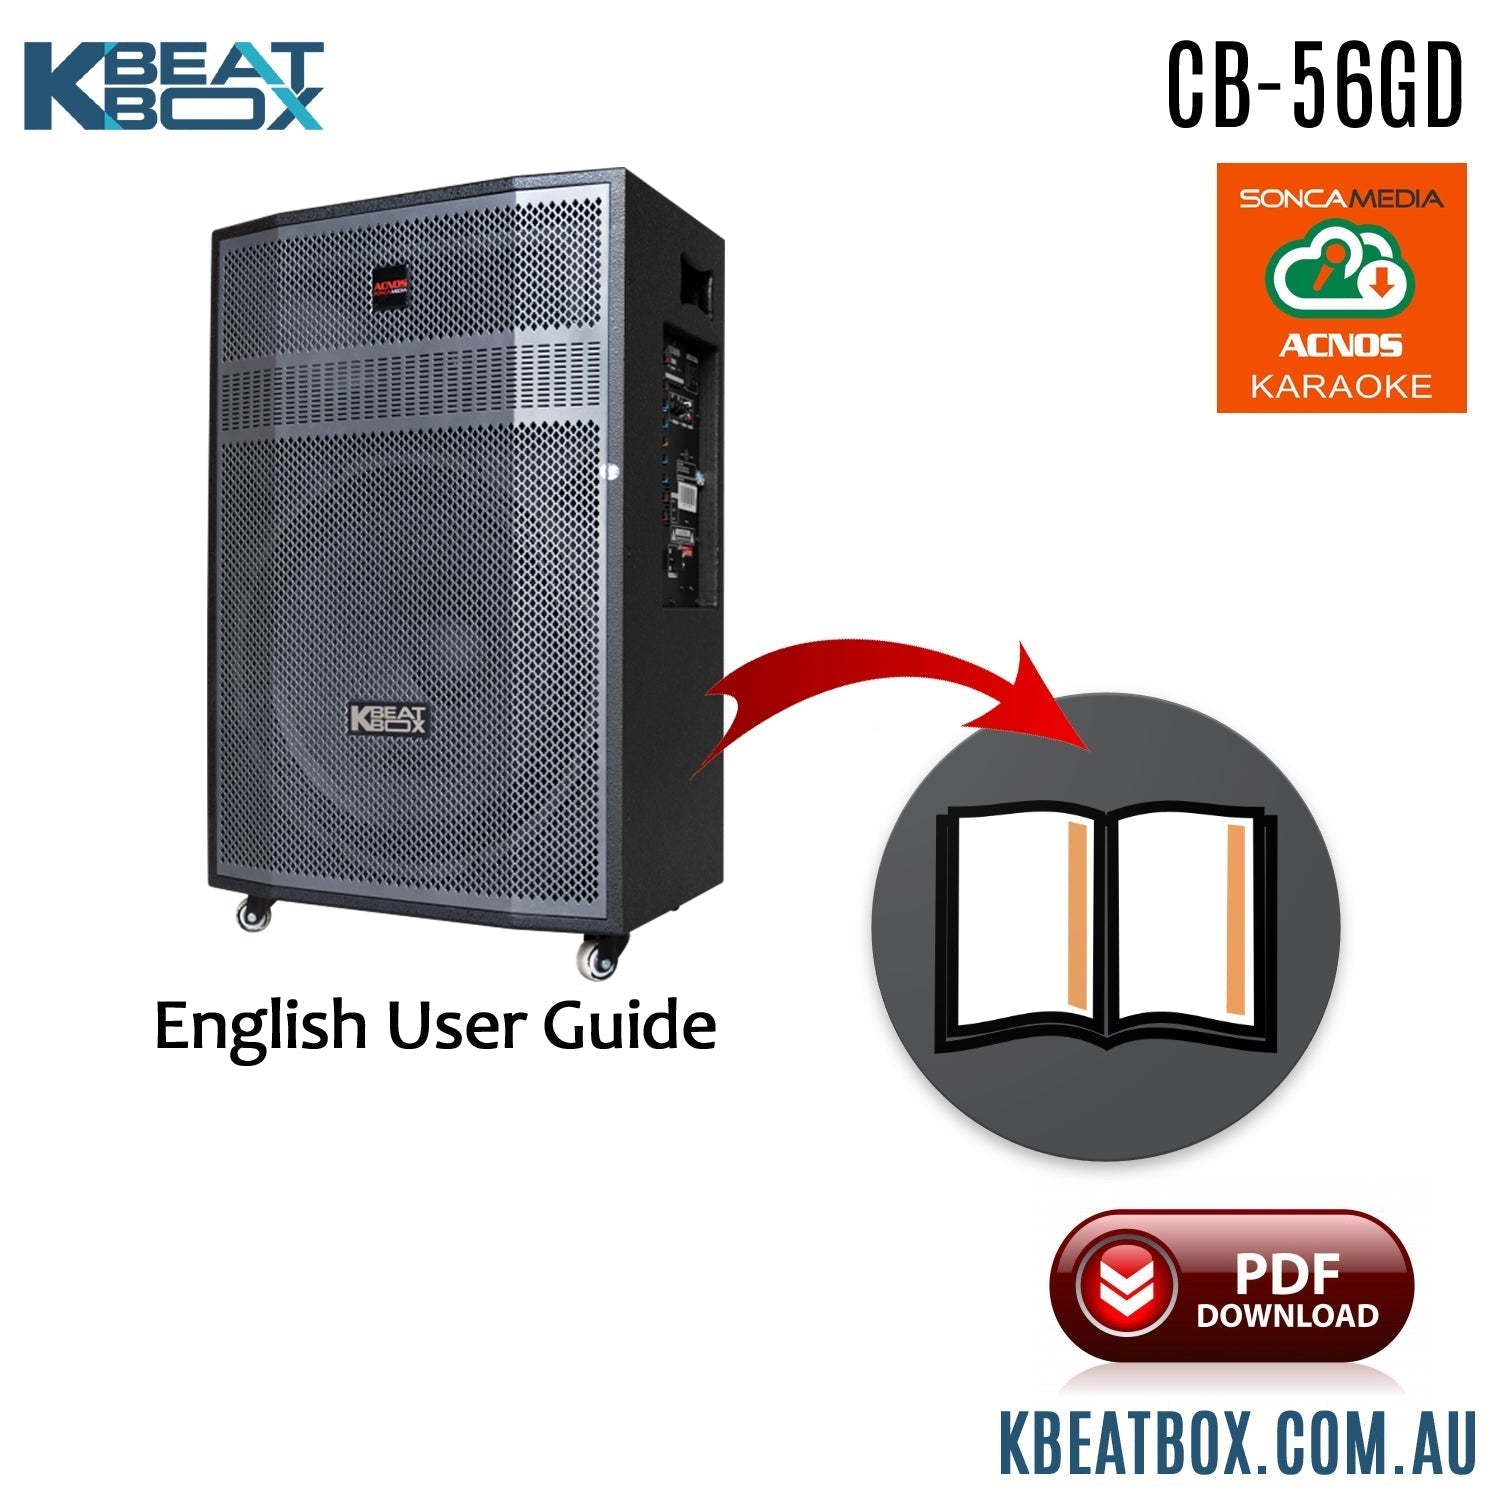 How To Connect Guide - KBeatBox CB-56GD - Karaoke Home Entertainment